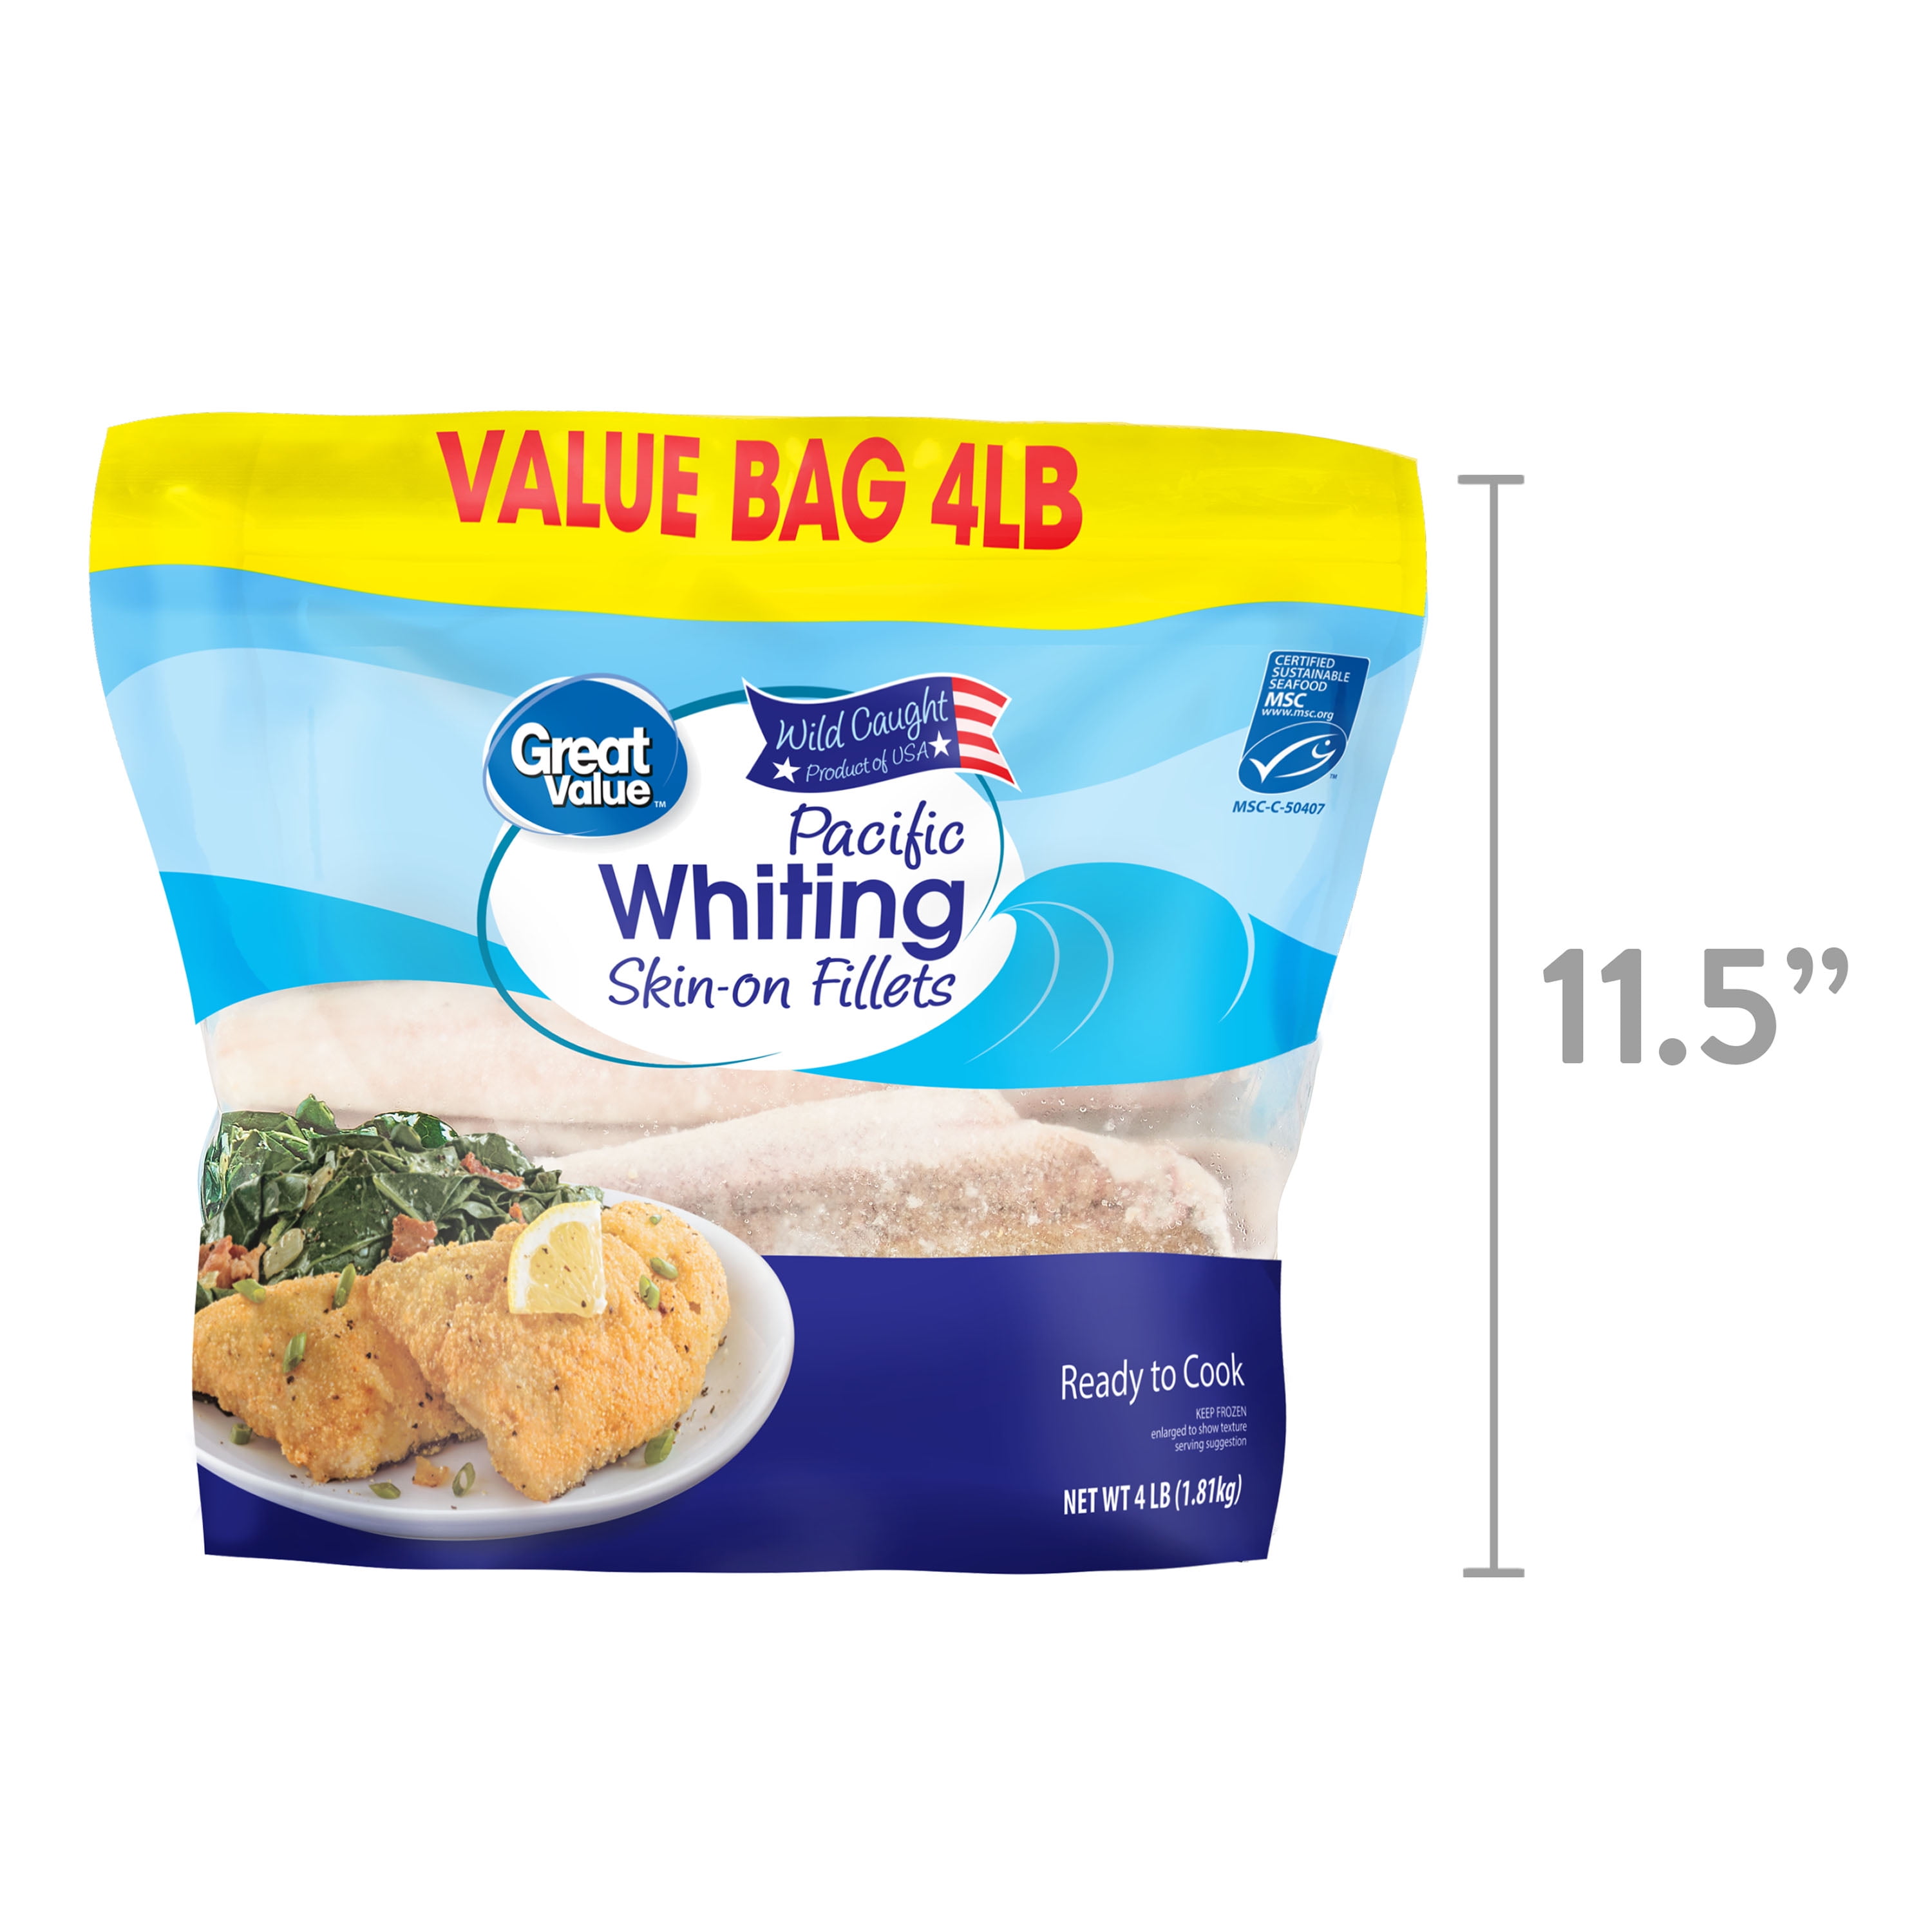 Great Value Wild Caught Pacific Whiting Fillets, Skin-on, Value Bag